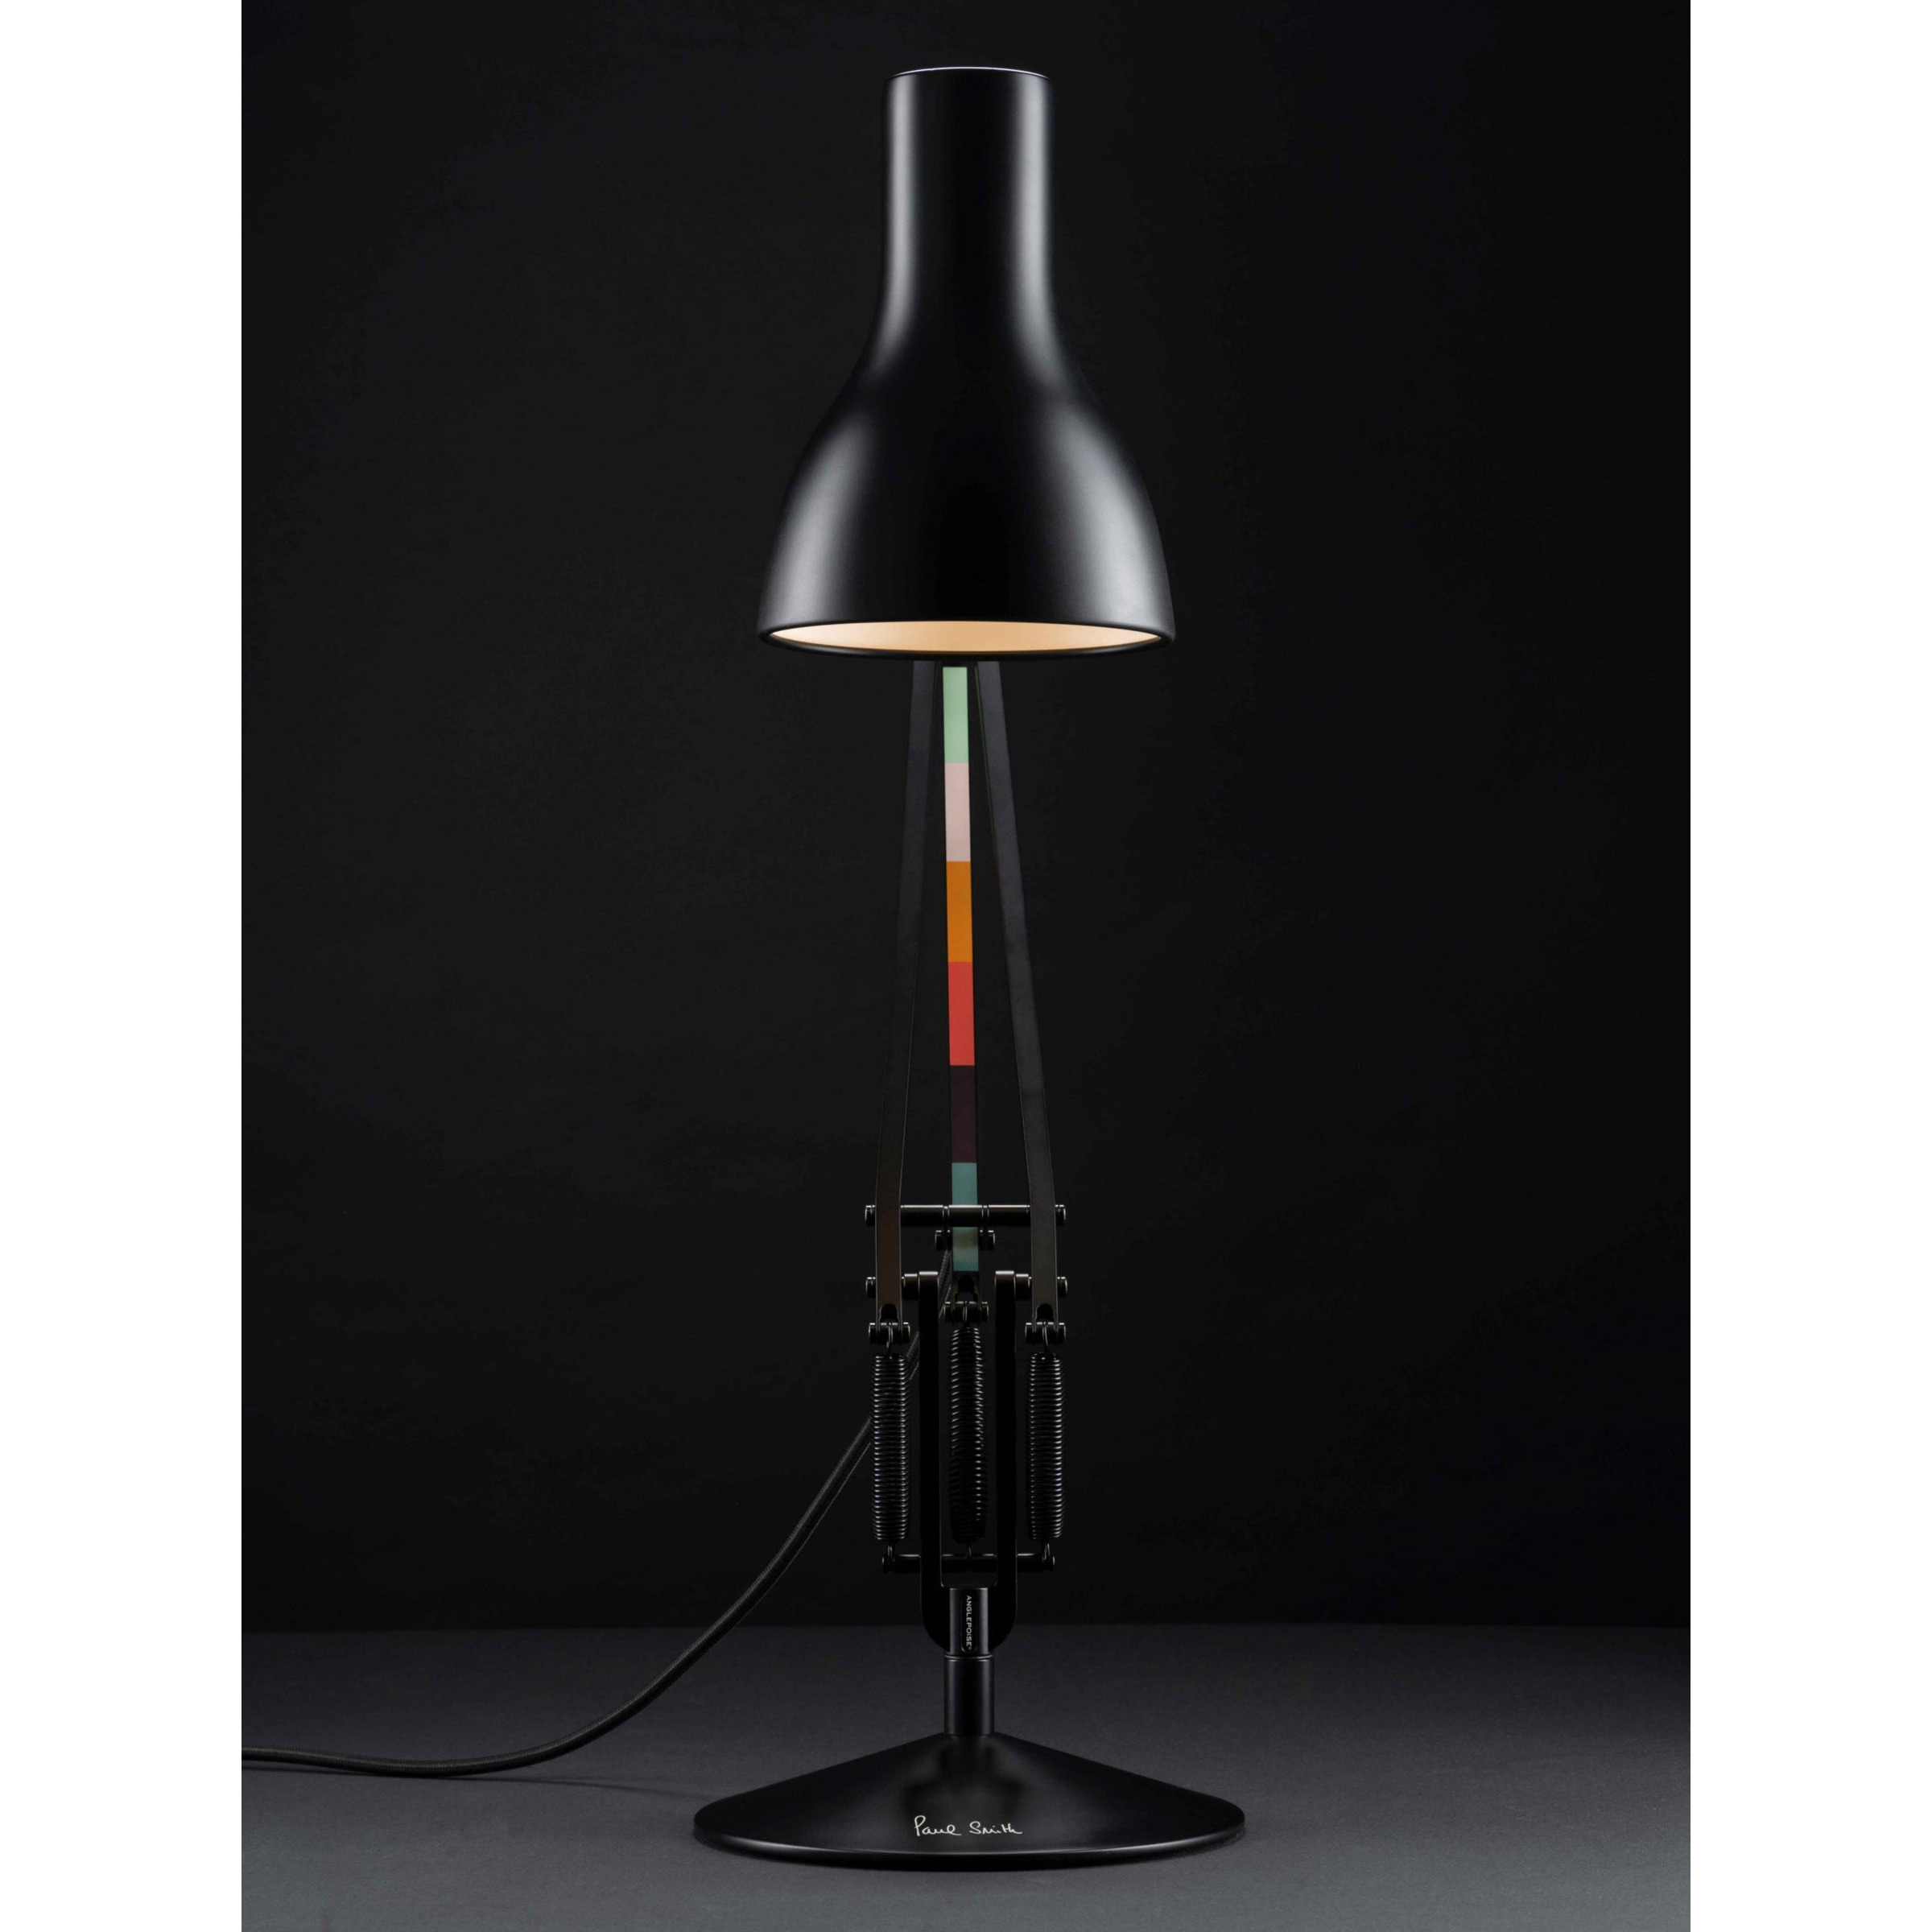 Anglepoise + Paul Smith Type 75 Desk Lamp, Edition 5 - image 1